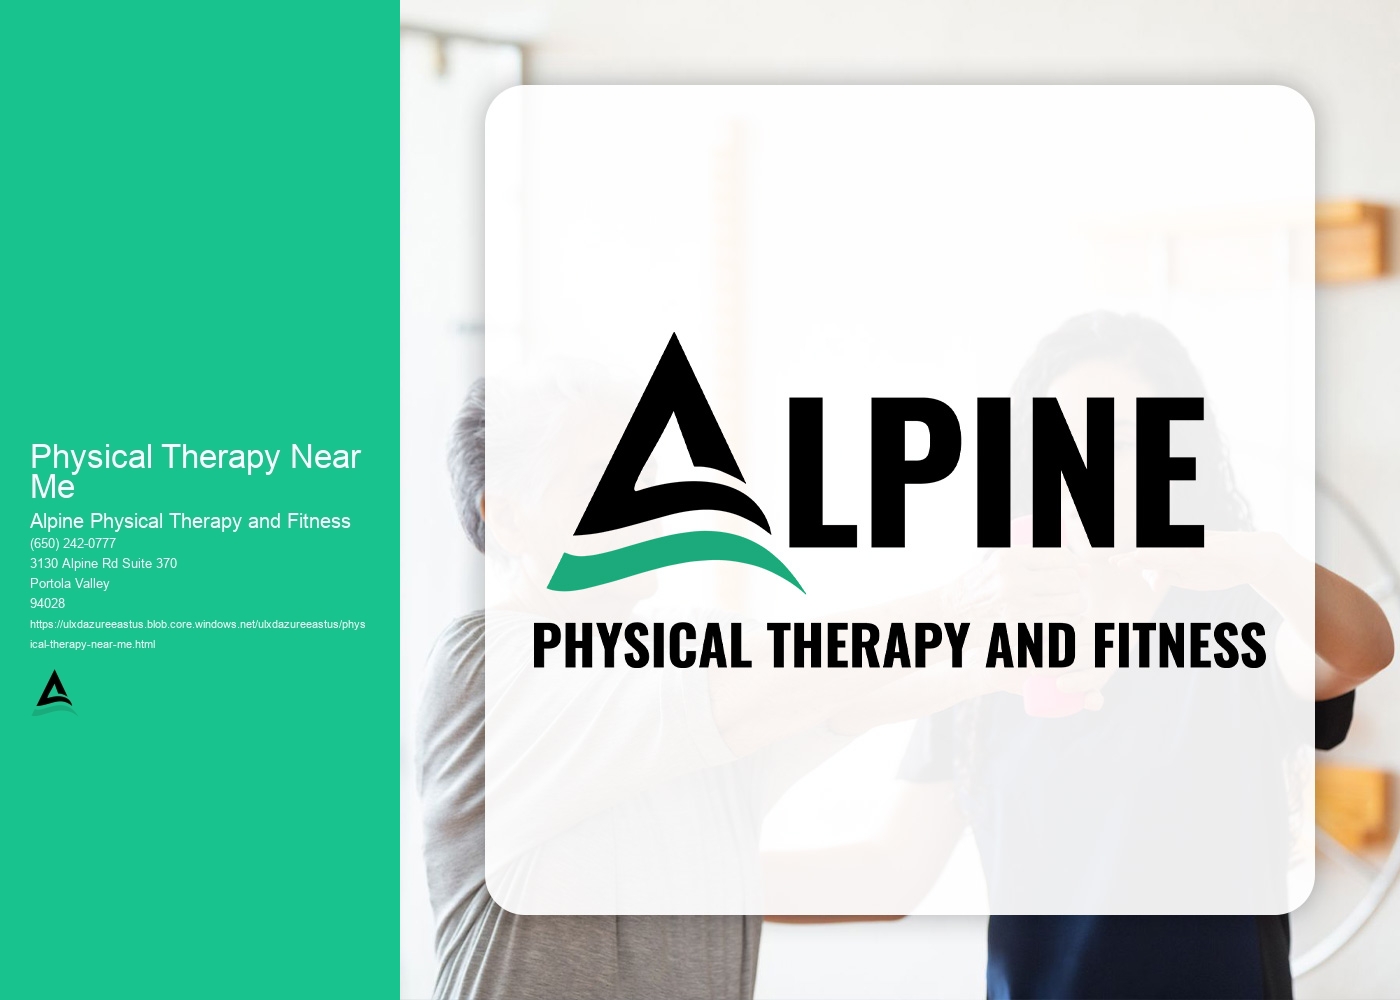 What are the different modalities used in physical therapy for pain management and tissue healing?